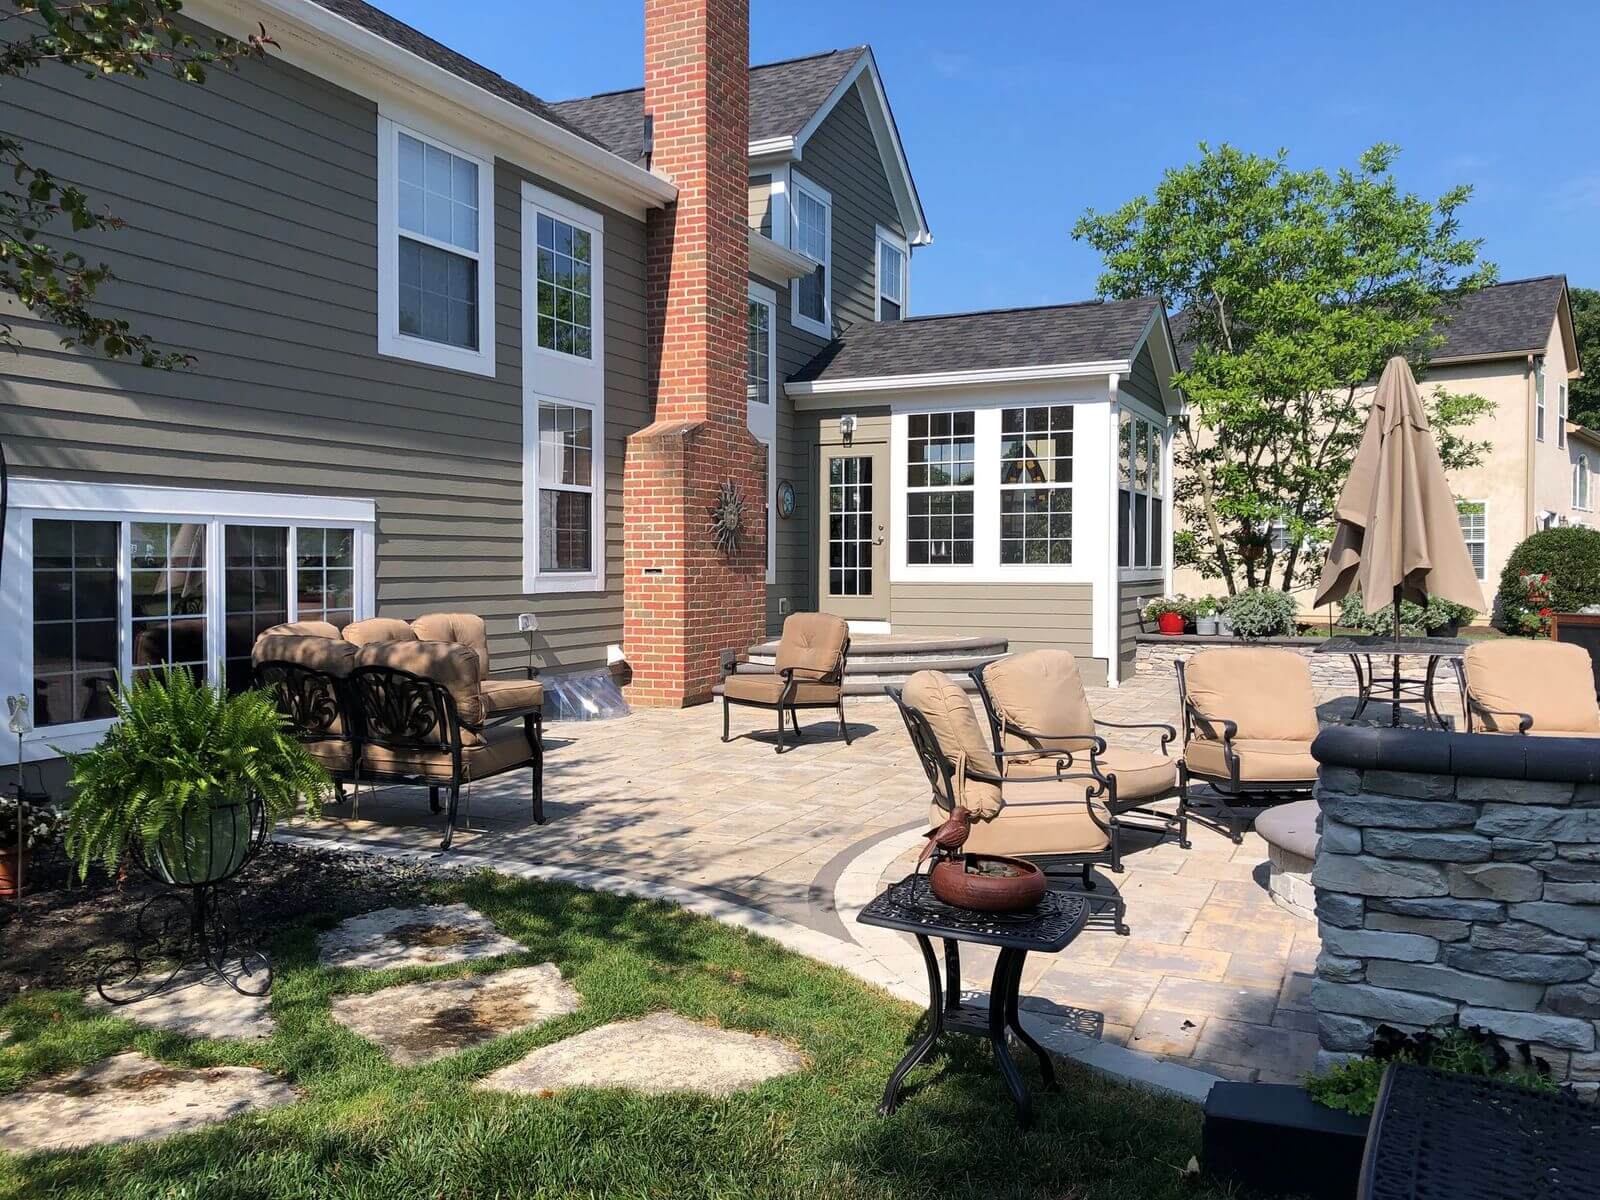 furnished paver patio